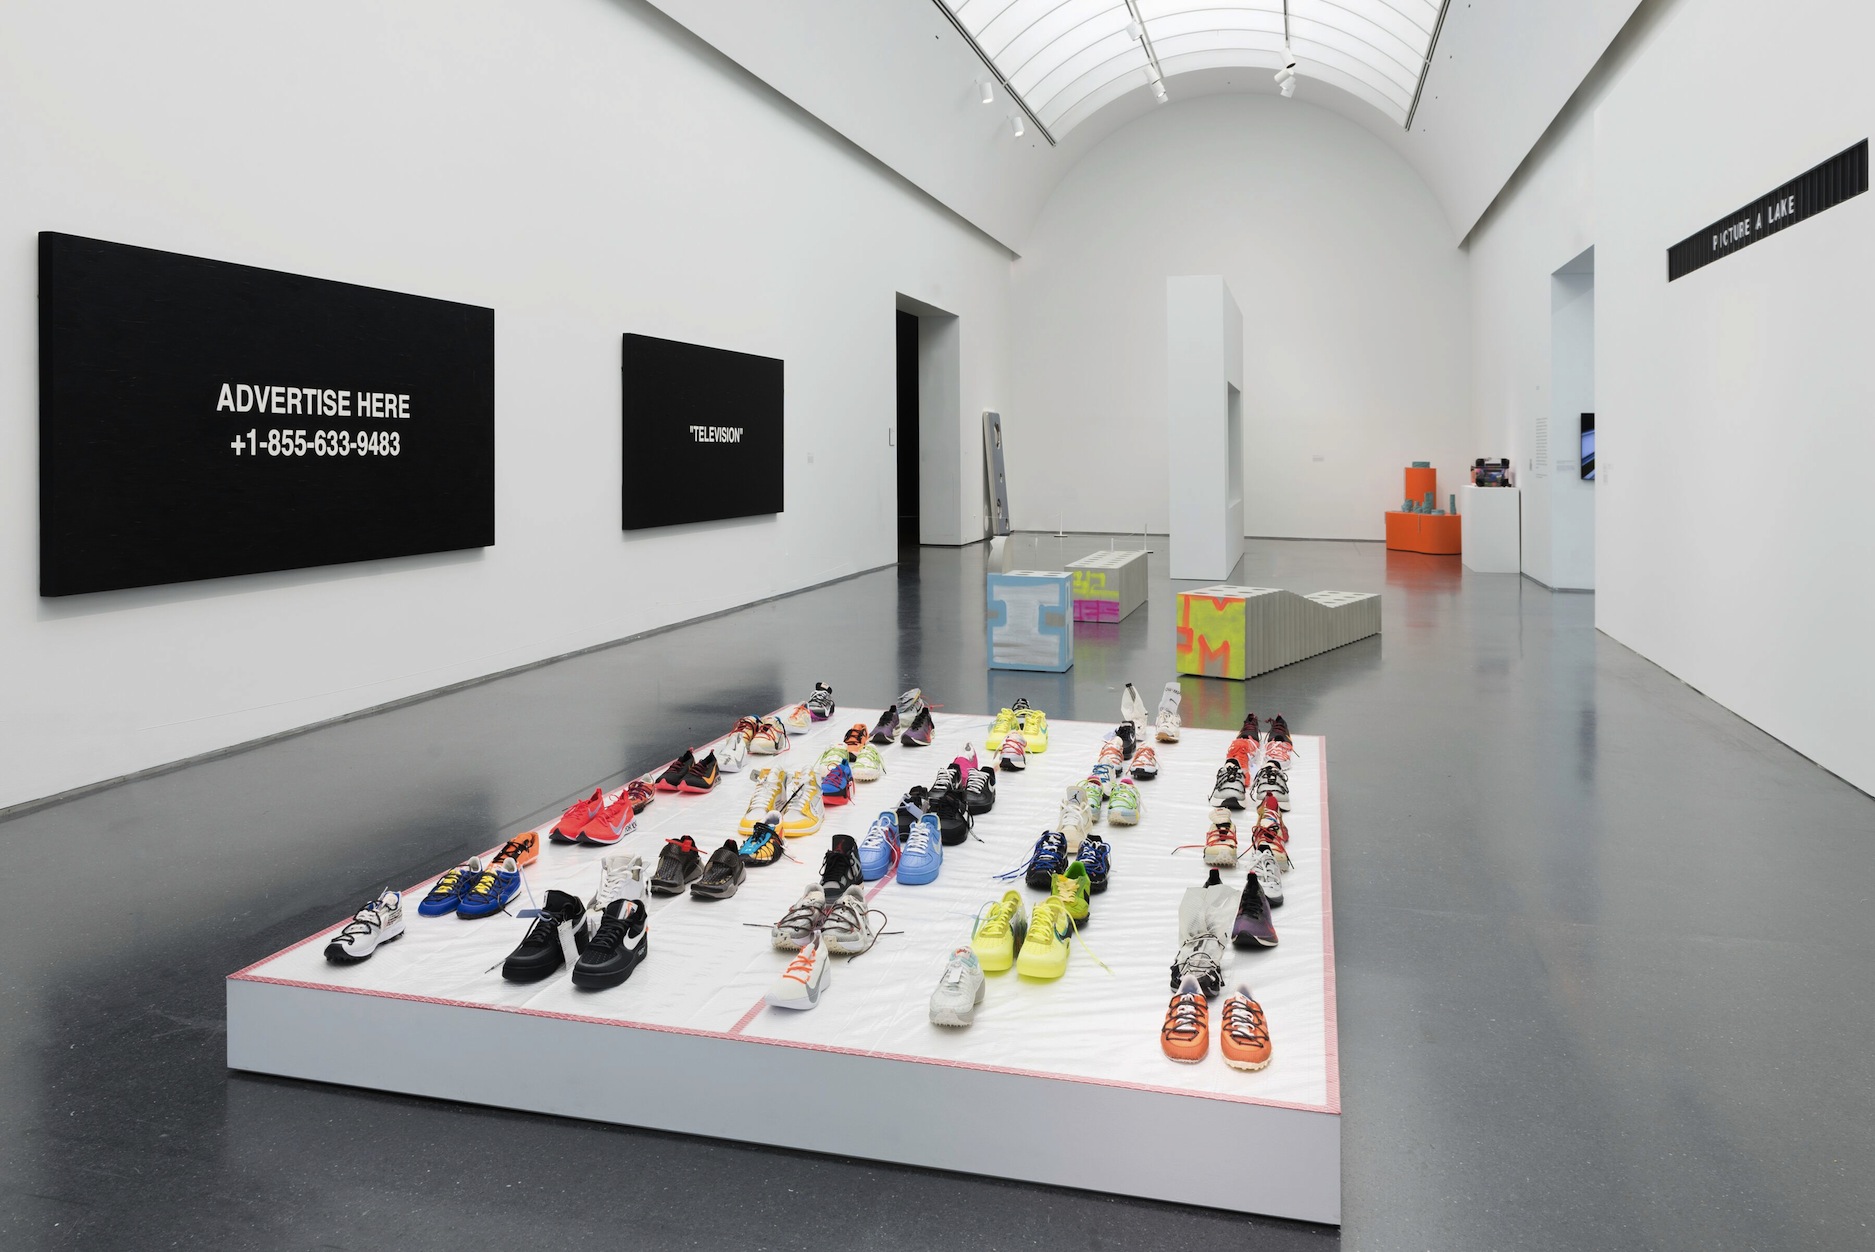 Virgil was here: Louis Vuitton's Art Basel show event becomes a